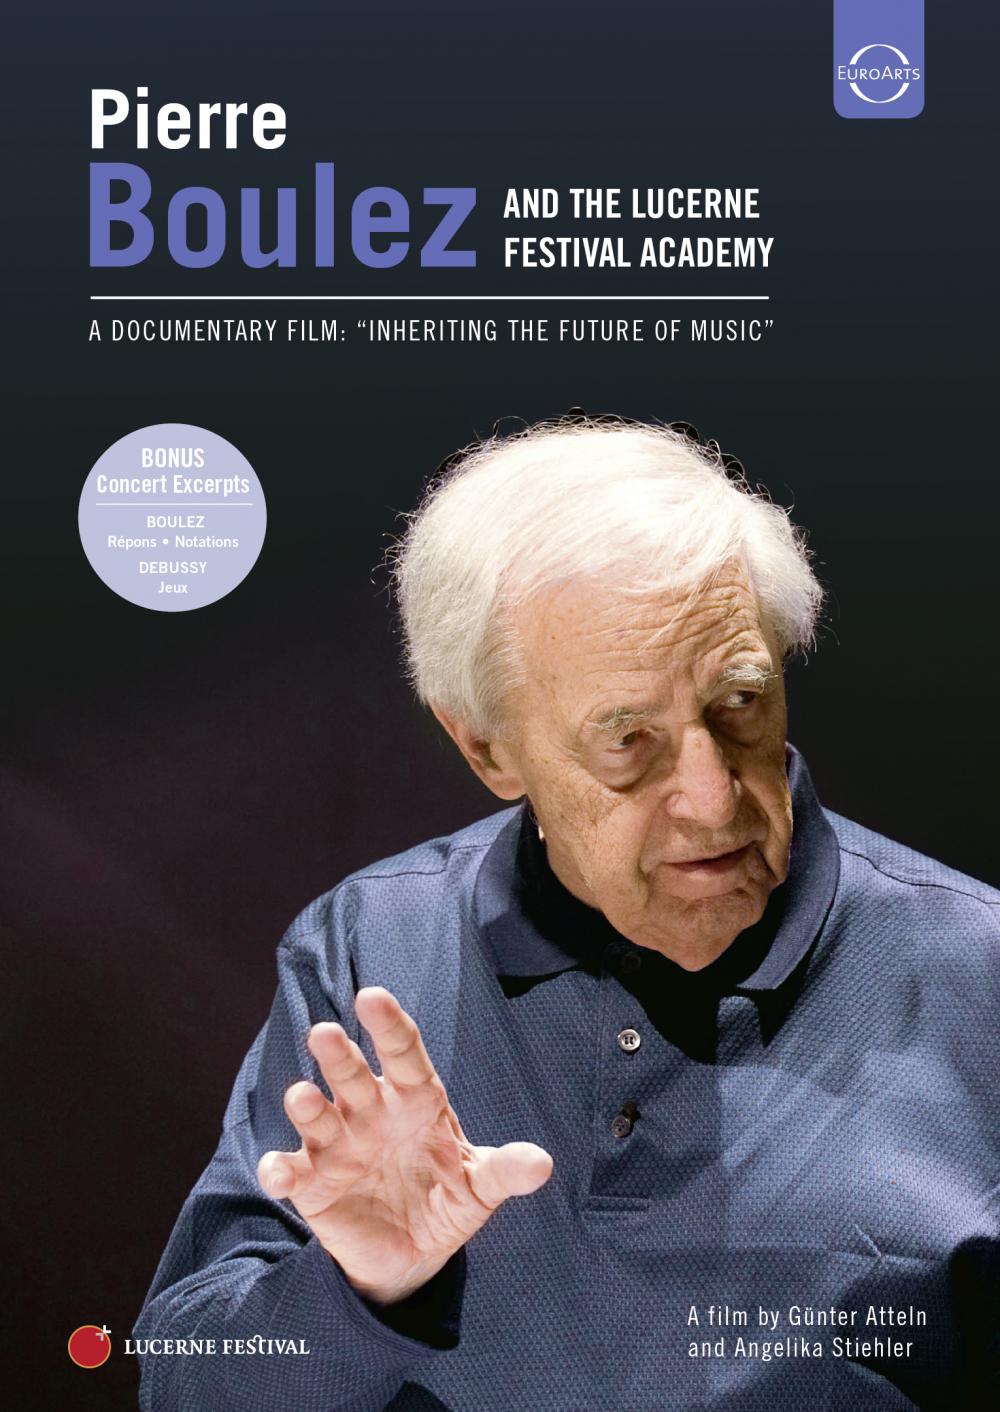 Pierre Boulez and the Lucerne Festival Academy "Inheriting The Future of Music" (Documentary on DVD)